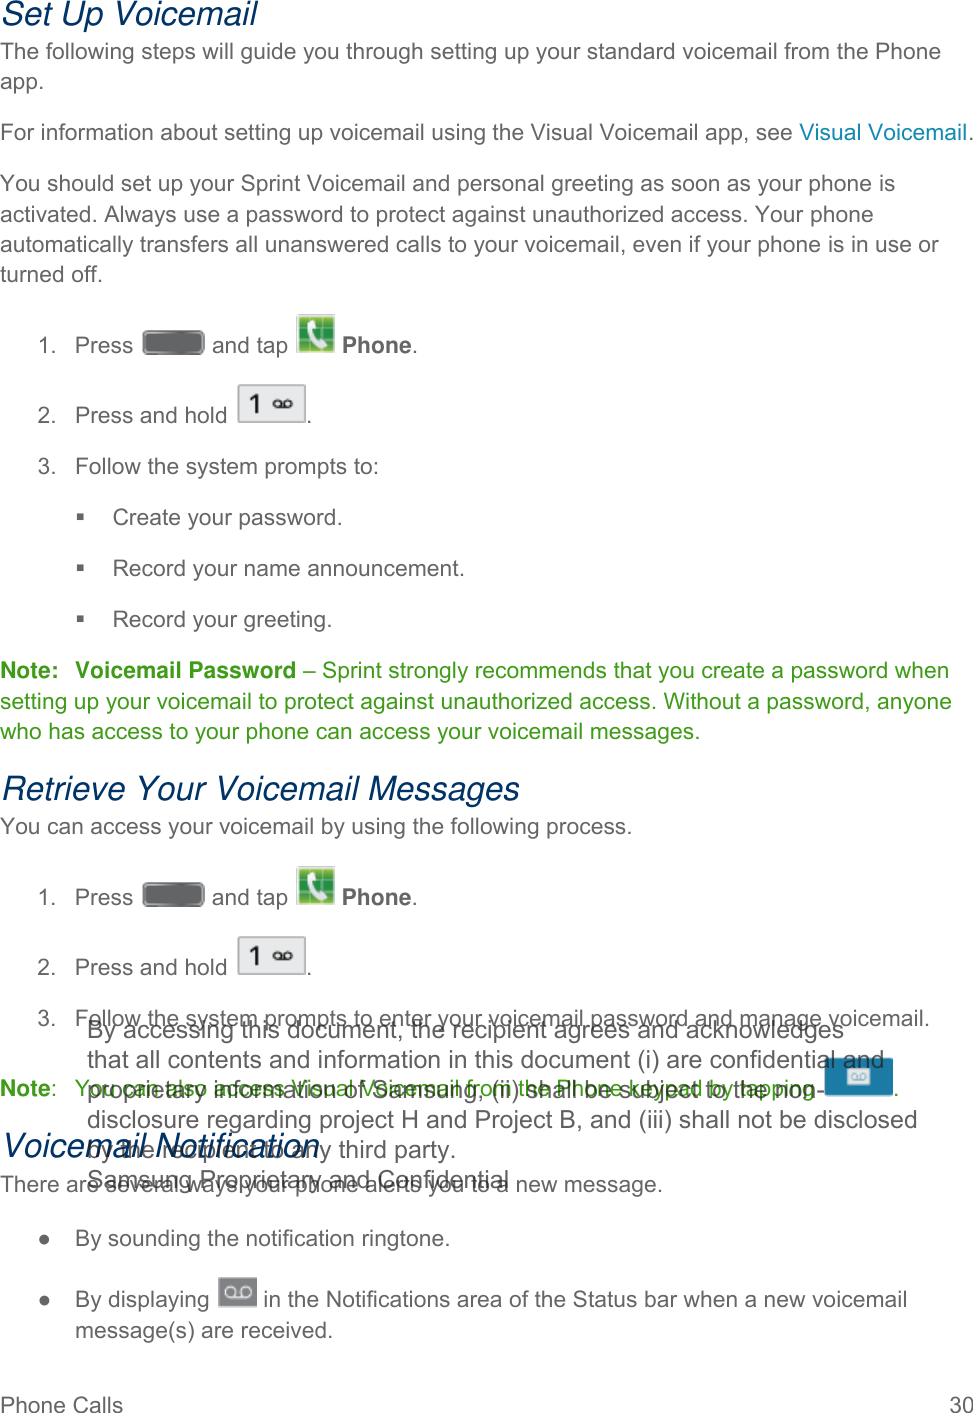 Phone Calls 30   Set Up Voicemail The following steps will guide you through setting up your standard voicemail from the Phone app.  For information about setting up voicemail using the Visual Voicemail app, see Visual Voicemail. You should set up your Sprint Voicemail and personal greeting as soon as your phone is activated. Always use a password to protect against unauthorized access. Your phone automatically transfers all unanswered calls to your voicemail, even if your phone is in use or turned off. 1.  Press   and tap   Phone. 2. Press and hold  . 3. Follow the system prompts to:  Create your password.  Record your name announcement.  Record your greeting. Note: Voicemail Password – Sprint strongly recommends that you create a password when setting up your voicemail to protect against unauthorized access. Without a password, anyone who has access to your phone can access your voicemail messages. Retrieve Your Voicemail Messages You can access your voicemail by using the following process.  1.  Press   and tap   Phone. 2. Press and hold  . 3. Follow the system prompts to enter your voicemail password and manage voicemail. Note:  You can also access Visual Voicemail from the Phone keypad by tapping  . Voicemail Notification There are several ways your phone alerts you to a new message. ● By sounding the notification ringtone. ● By displaying   in the Notifications area of the Status bar when a new voicemail message(s) are received. By accessing this document, the recipient agrees and acknowledges that all contents and information in this document (i) are confidential and proprietary information of Samsung, (ii) shall be subject to the non- disclosure regarding project H and Project B, and (iii) shall not be disclosed by the recipient to any third party. Samsung Proprietary and Confidential 